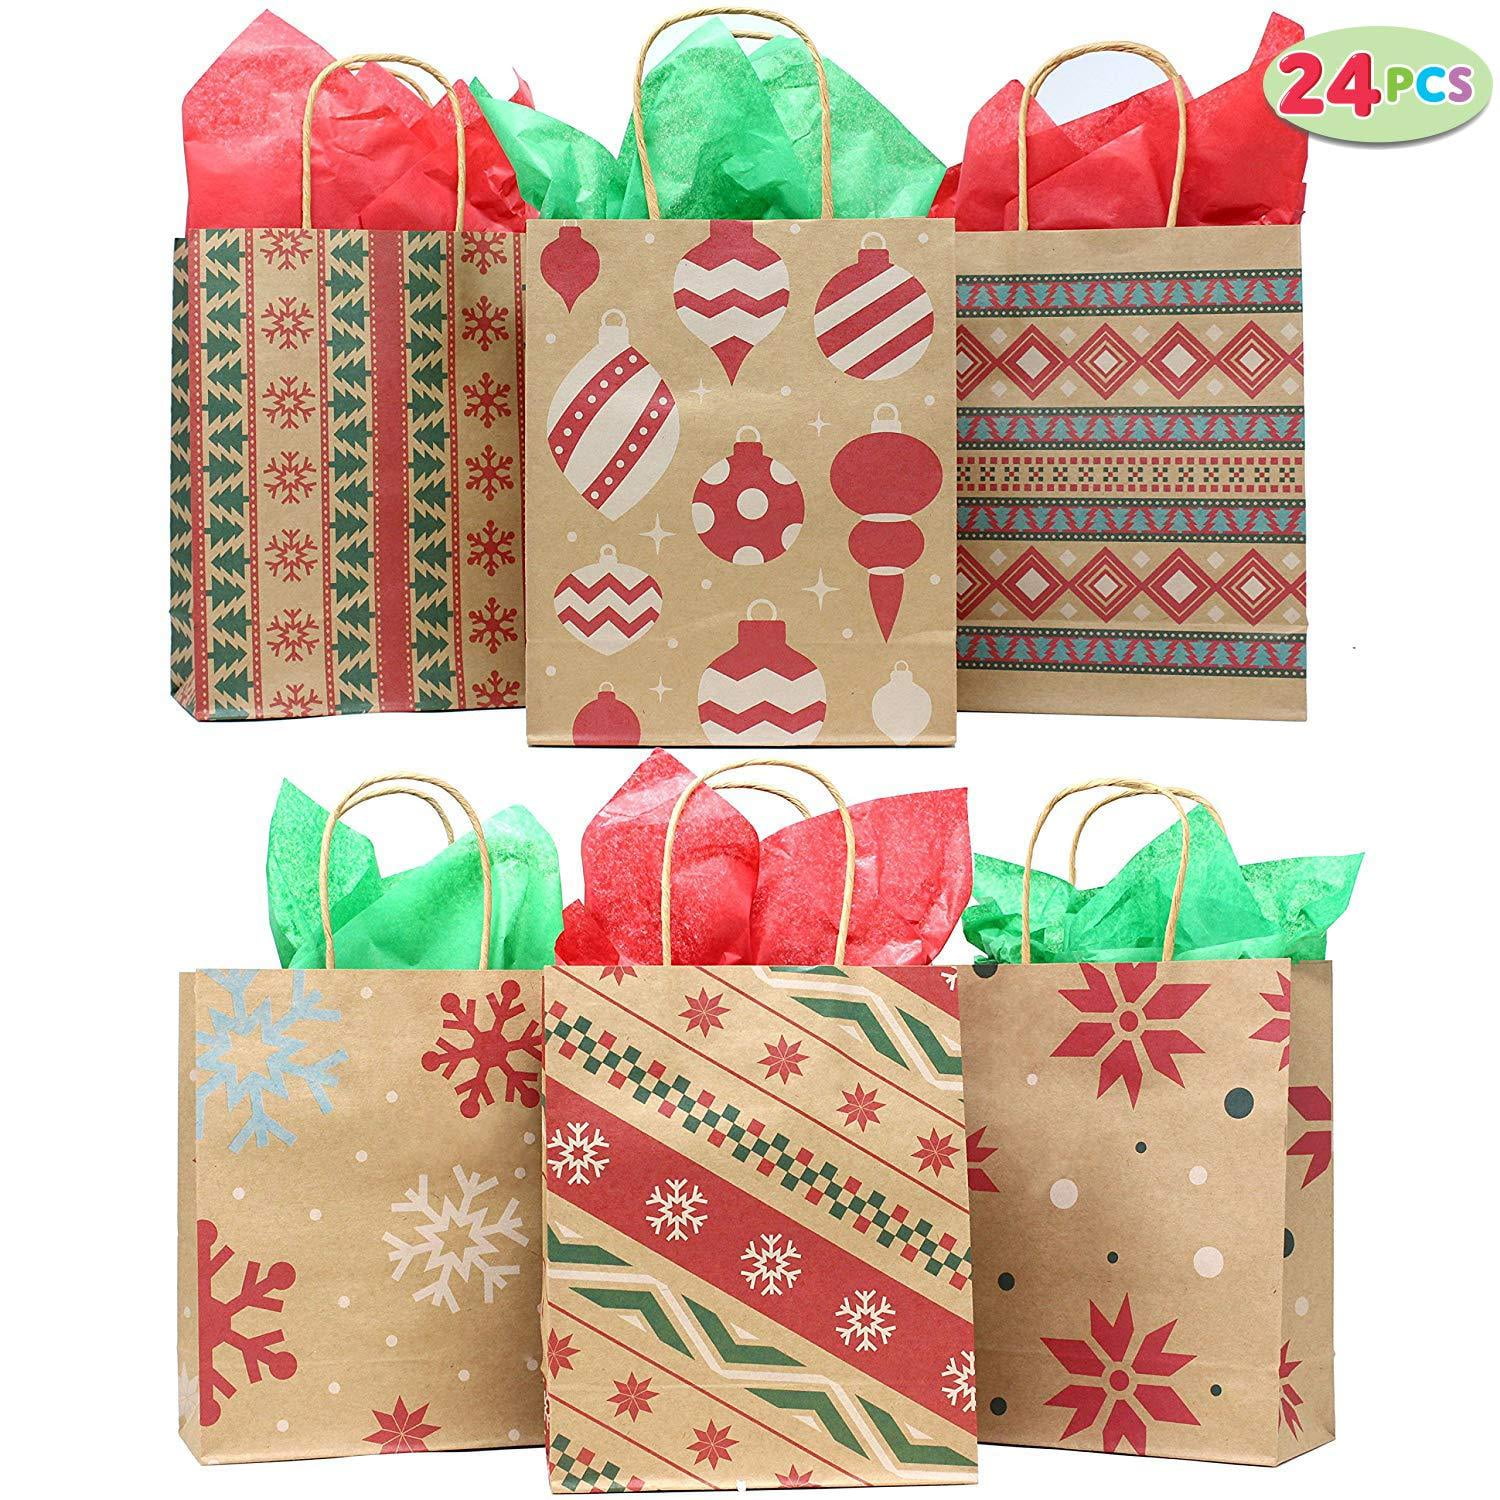 Santa Claus for Presend Wrap Goody Bags 16 Pack Bags with Handles School Classrooms Party Favors Christmas Kraft Paper Prints with Xmas Tree Snowman 